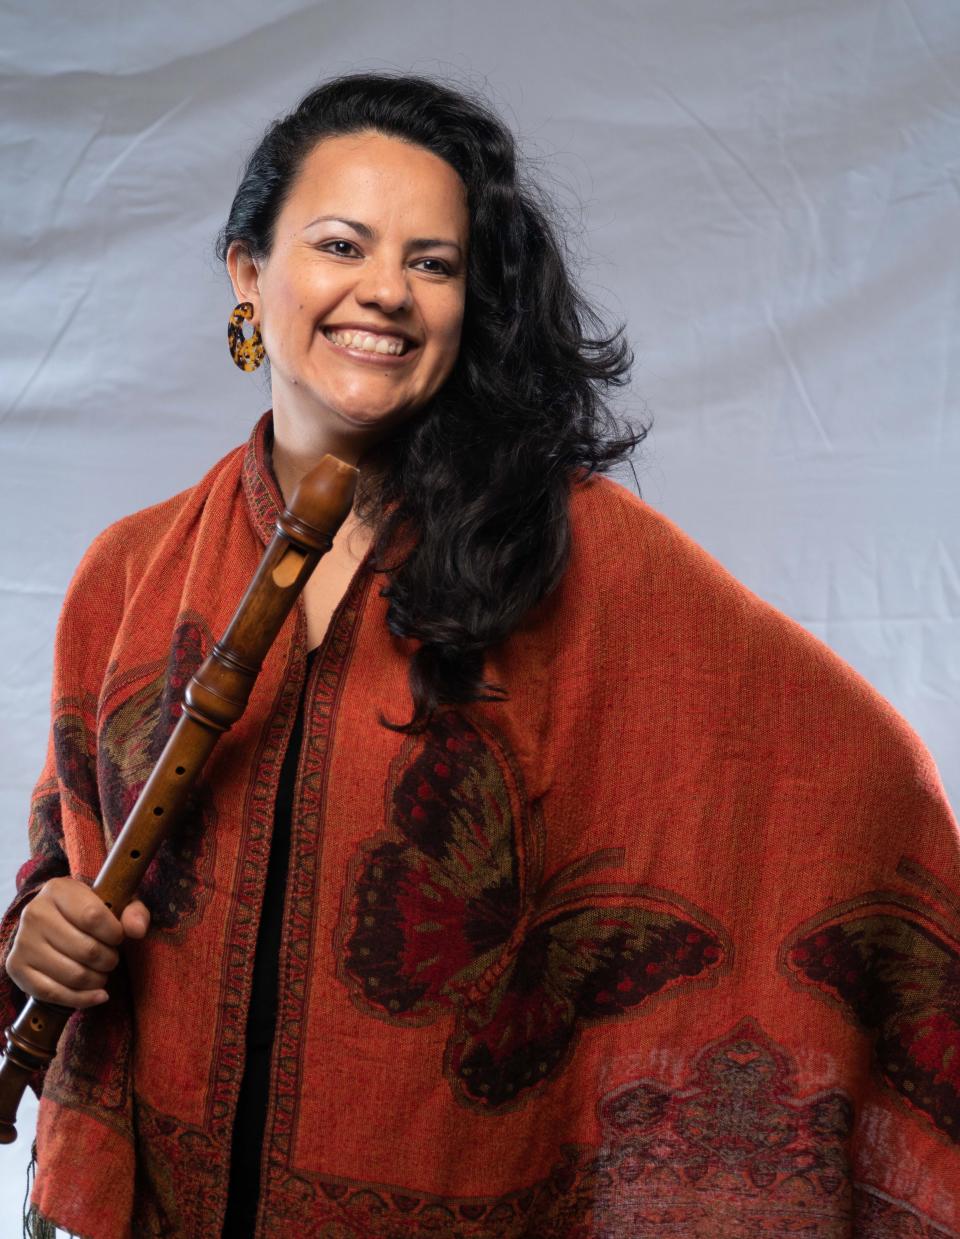 Vivianne Asturizaga performs with the Tallahassee Bach Parley on June 3-4, 2023.